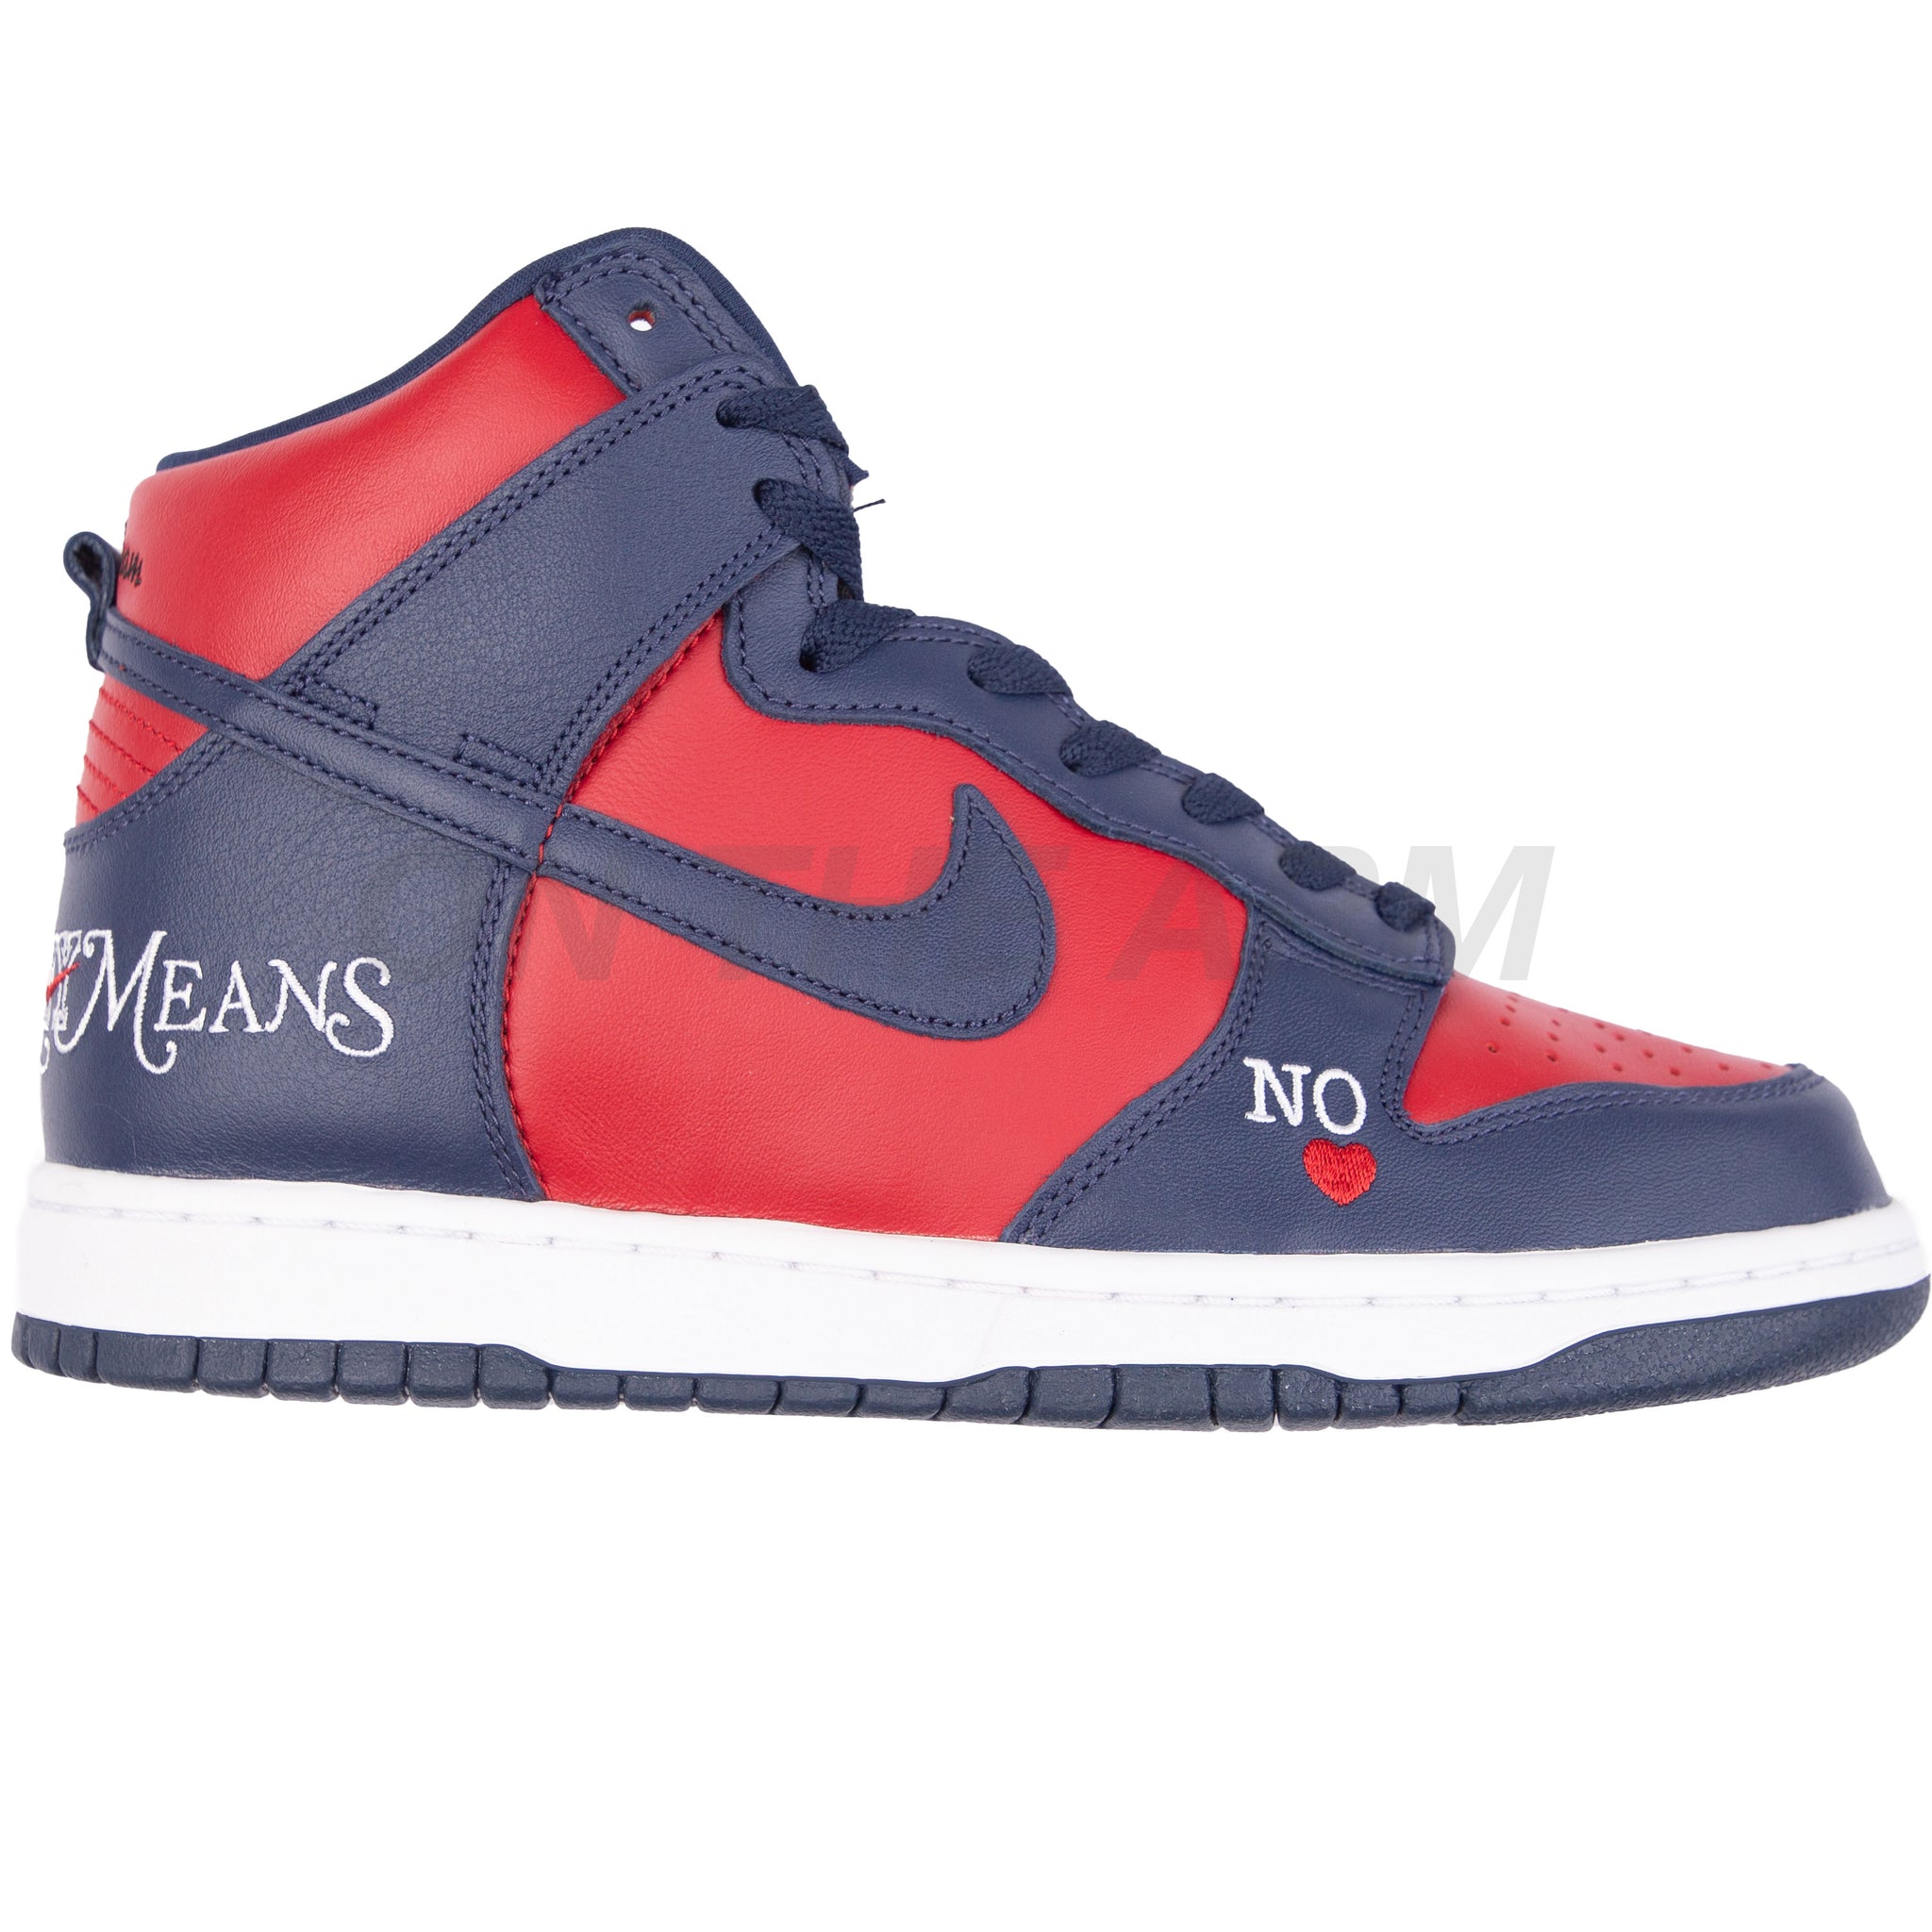 Nike SB Navy Supreme By Any Means Dunk High